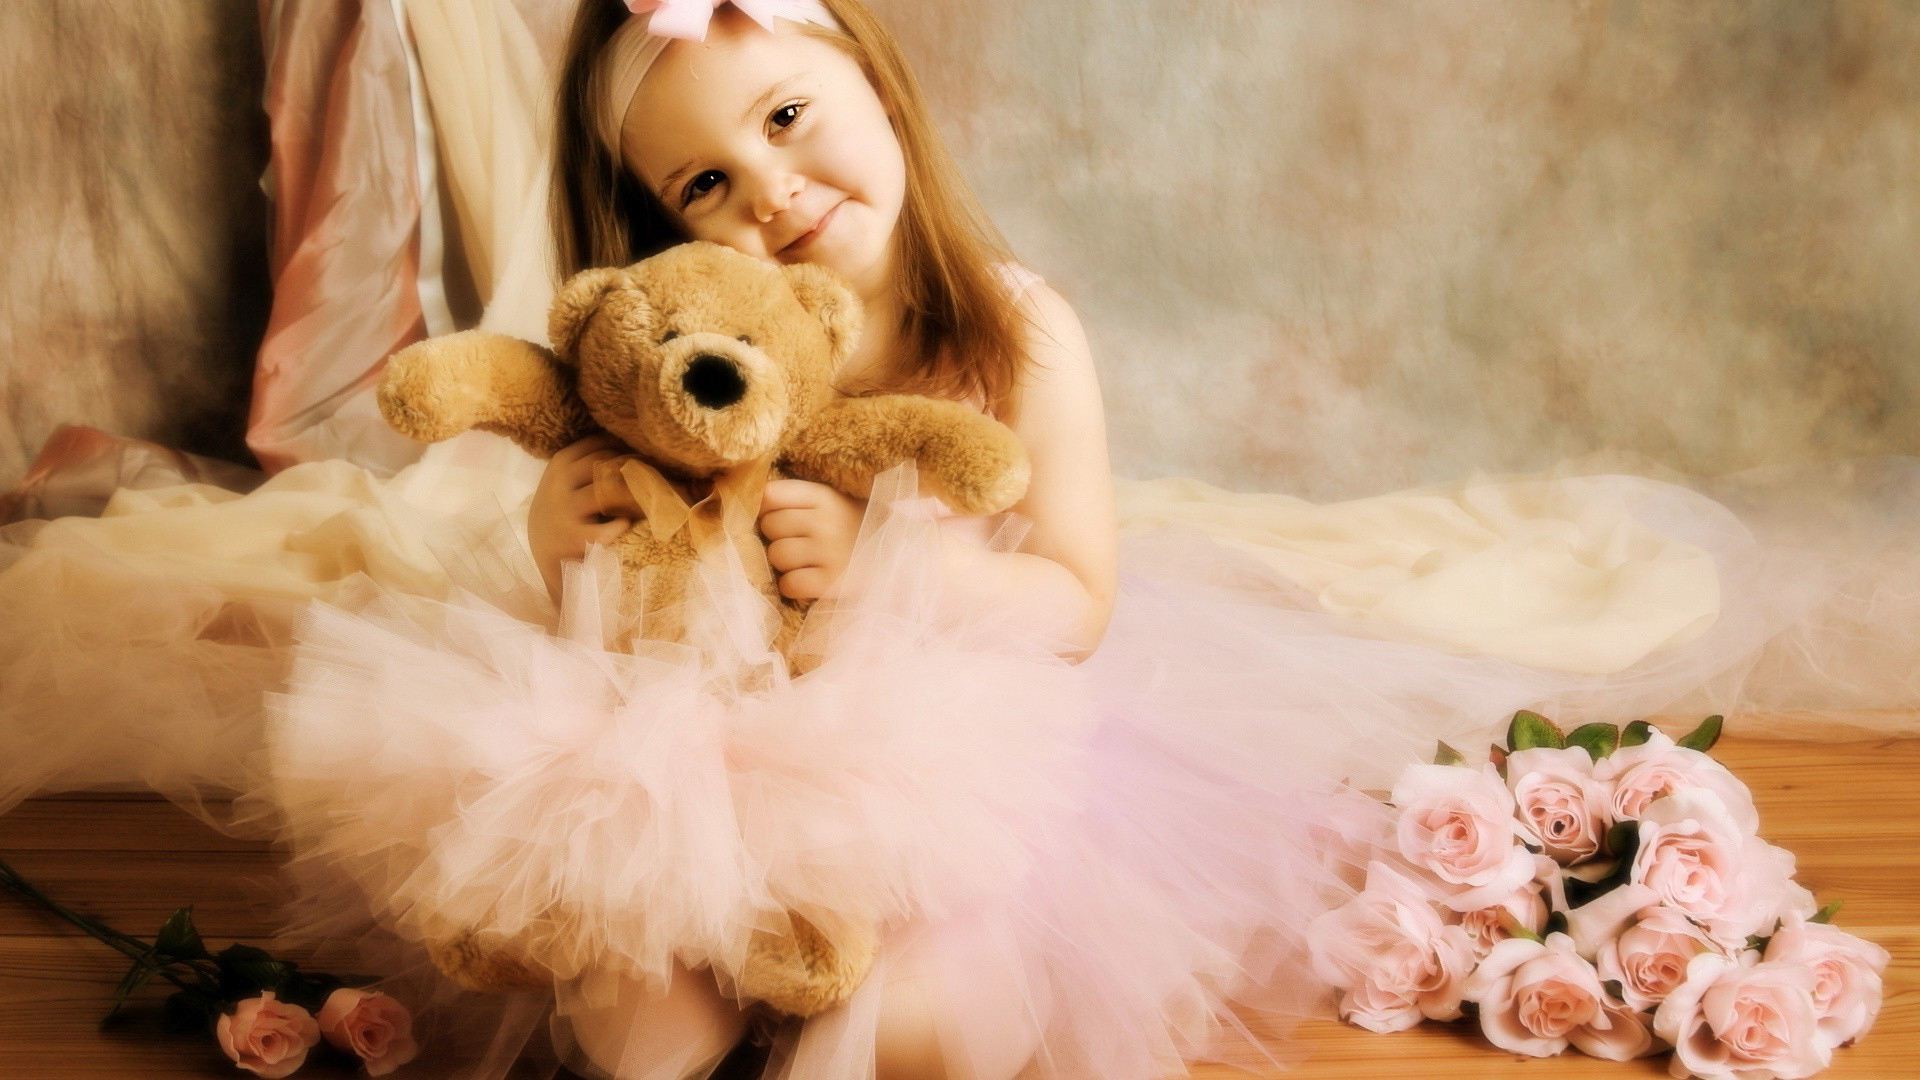 1920x1080 Beautiful Girls & Cute babies with Teddy Bear HD Wallpapers | Special Days  | Pics Story